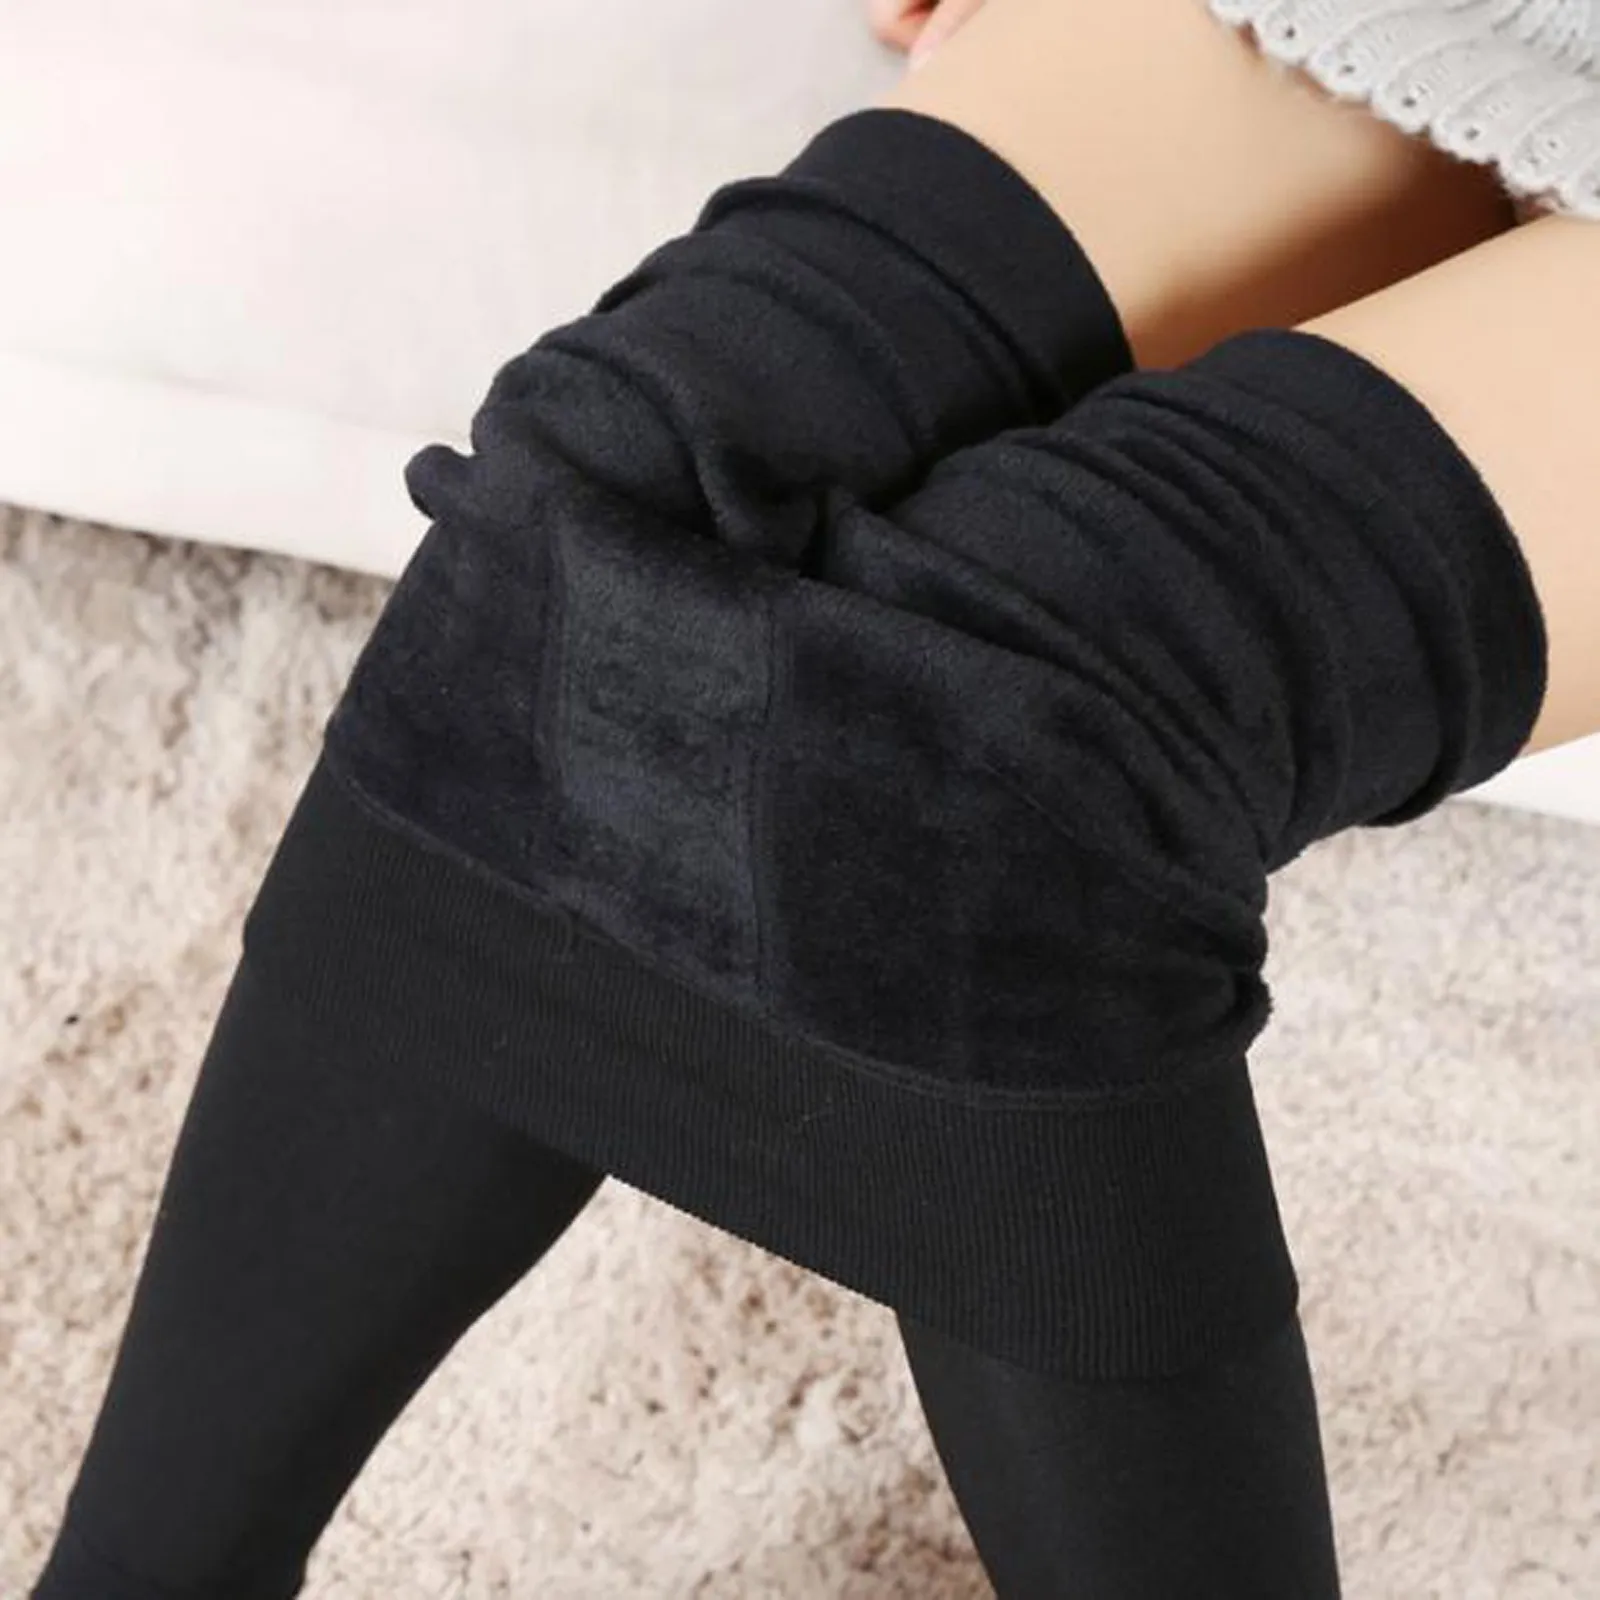 Winter Warm Legging Trousers Solid Women Velvet Thick Leggings Pants High Waist Elastic Tight Female Workout Cropped Underwear pantyhose tight fashion multicolor women thick velvet high waist trousers winter warm leggings super thick high stretch skinny